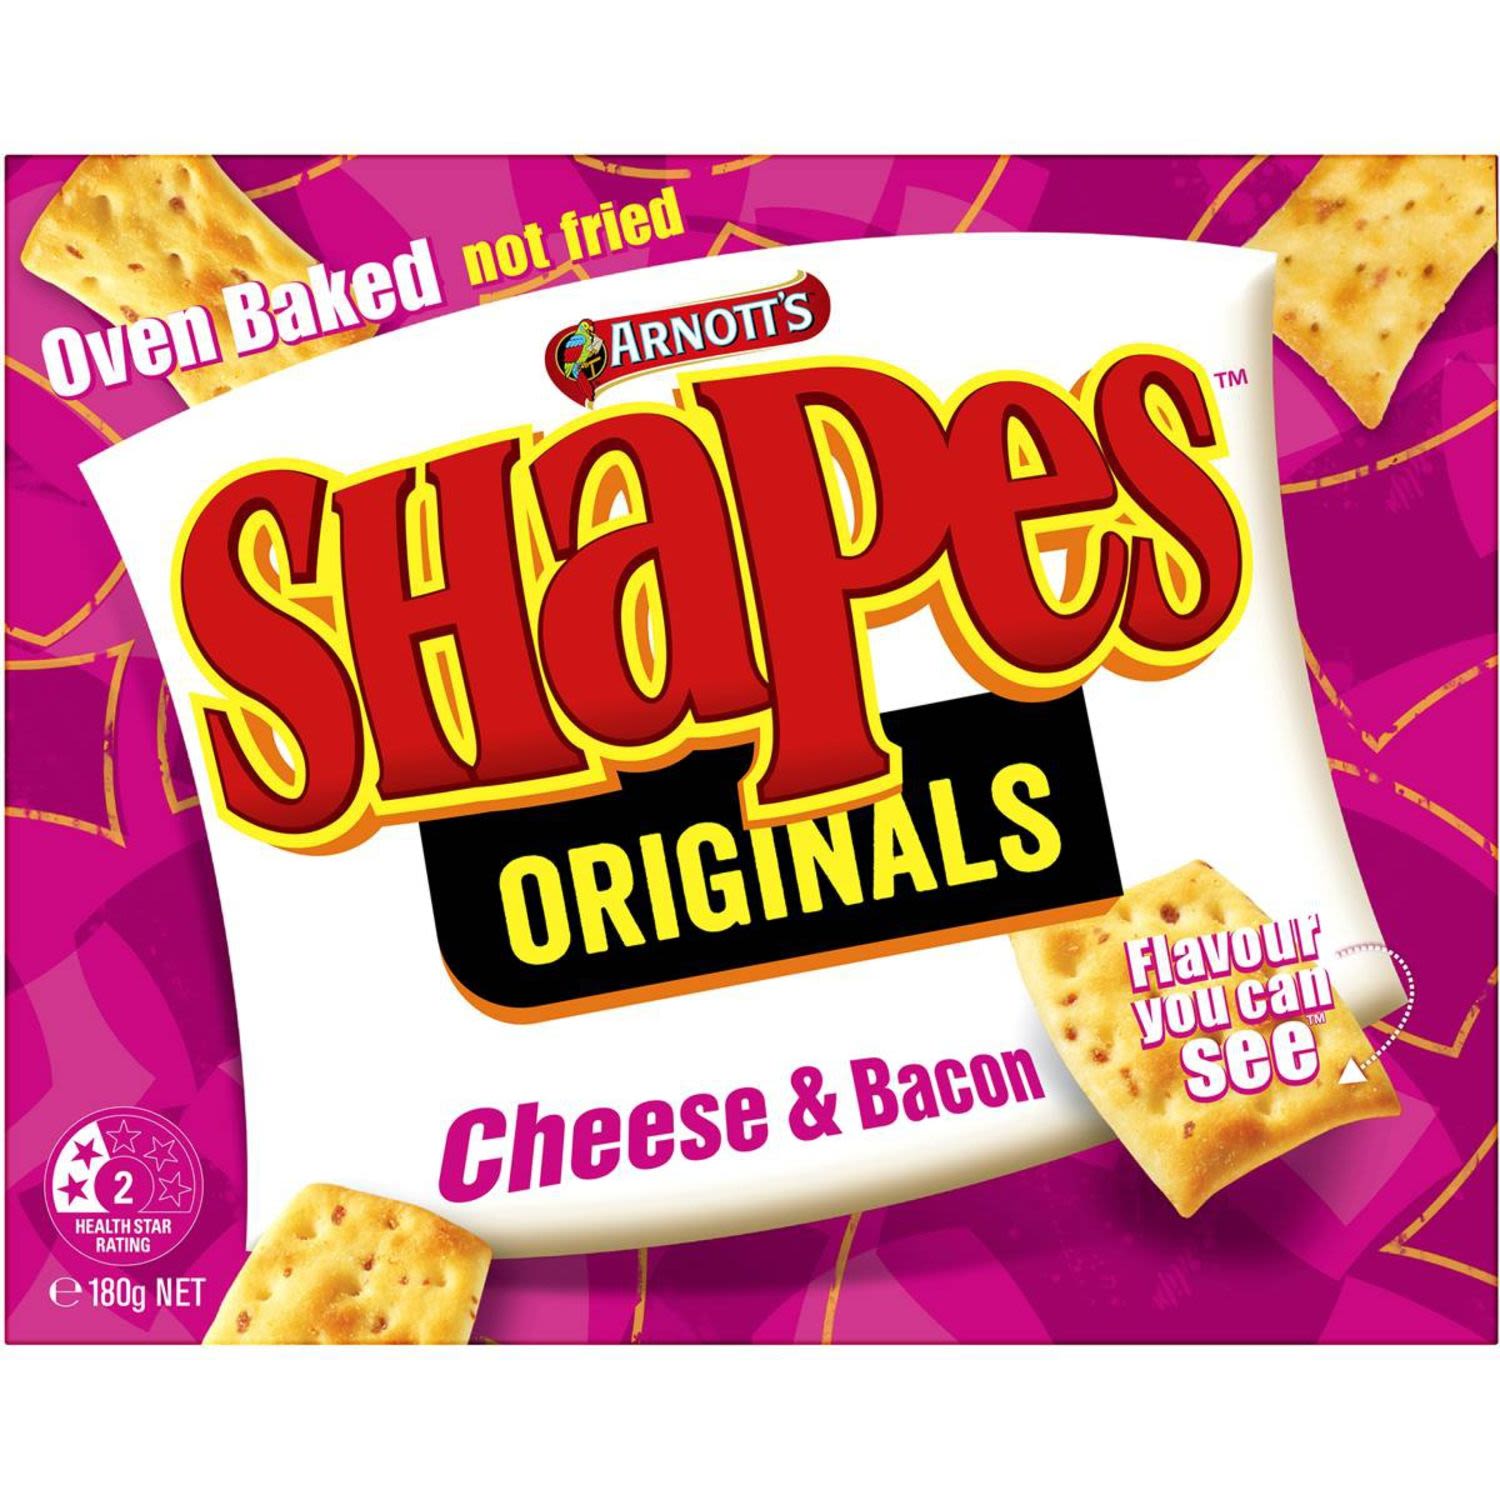 Arnotts Shapes Cheese & Bacon 180gm